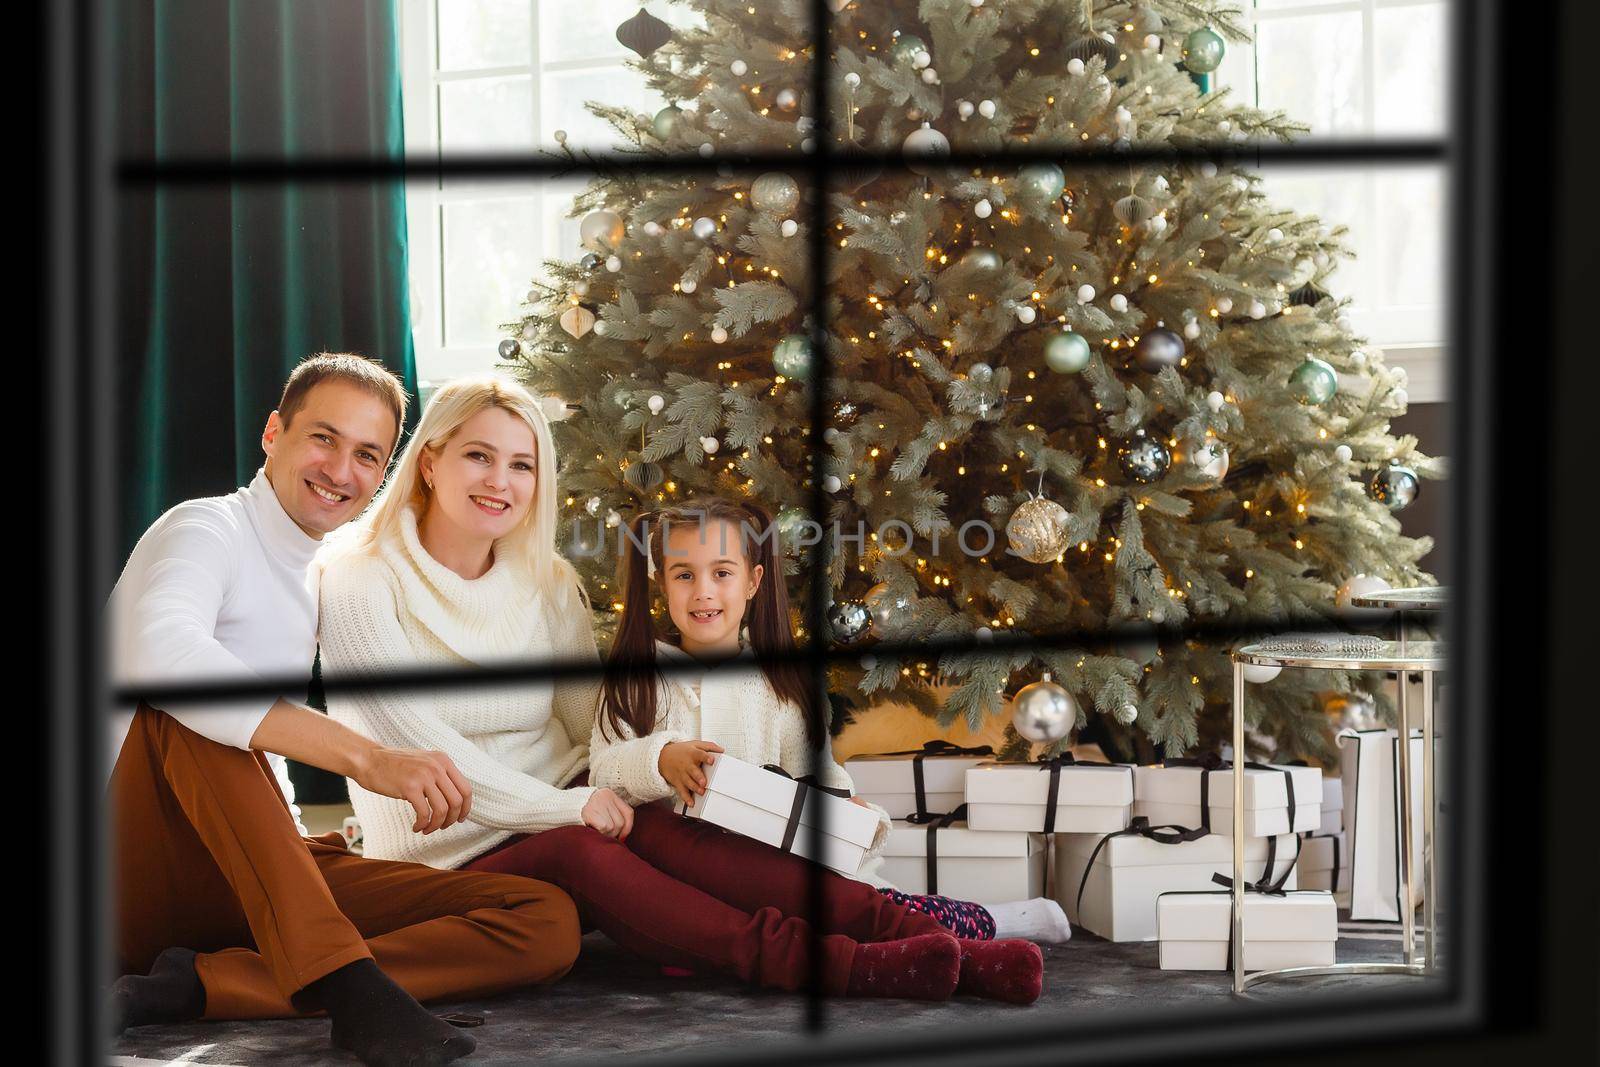 Young big family celebrating Christmas enjoying dinner, view from outside through a window into a decorated living room with tree and candle lights, happy parents eating with three kids